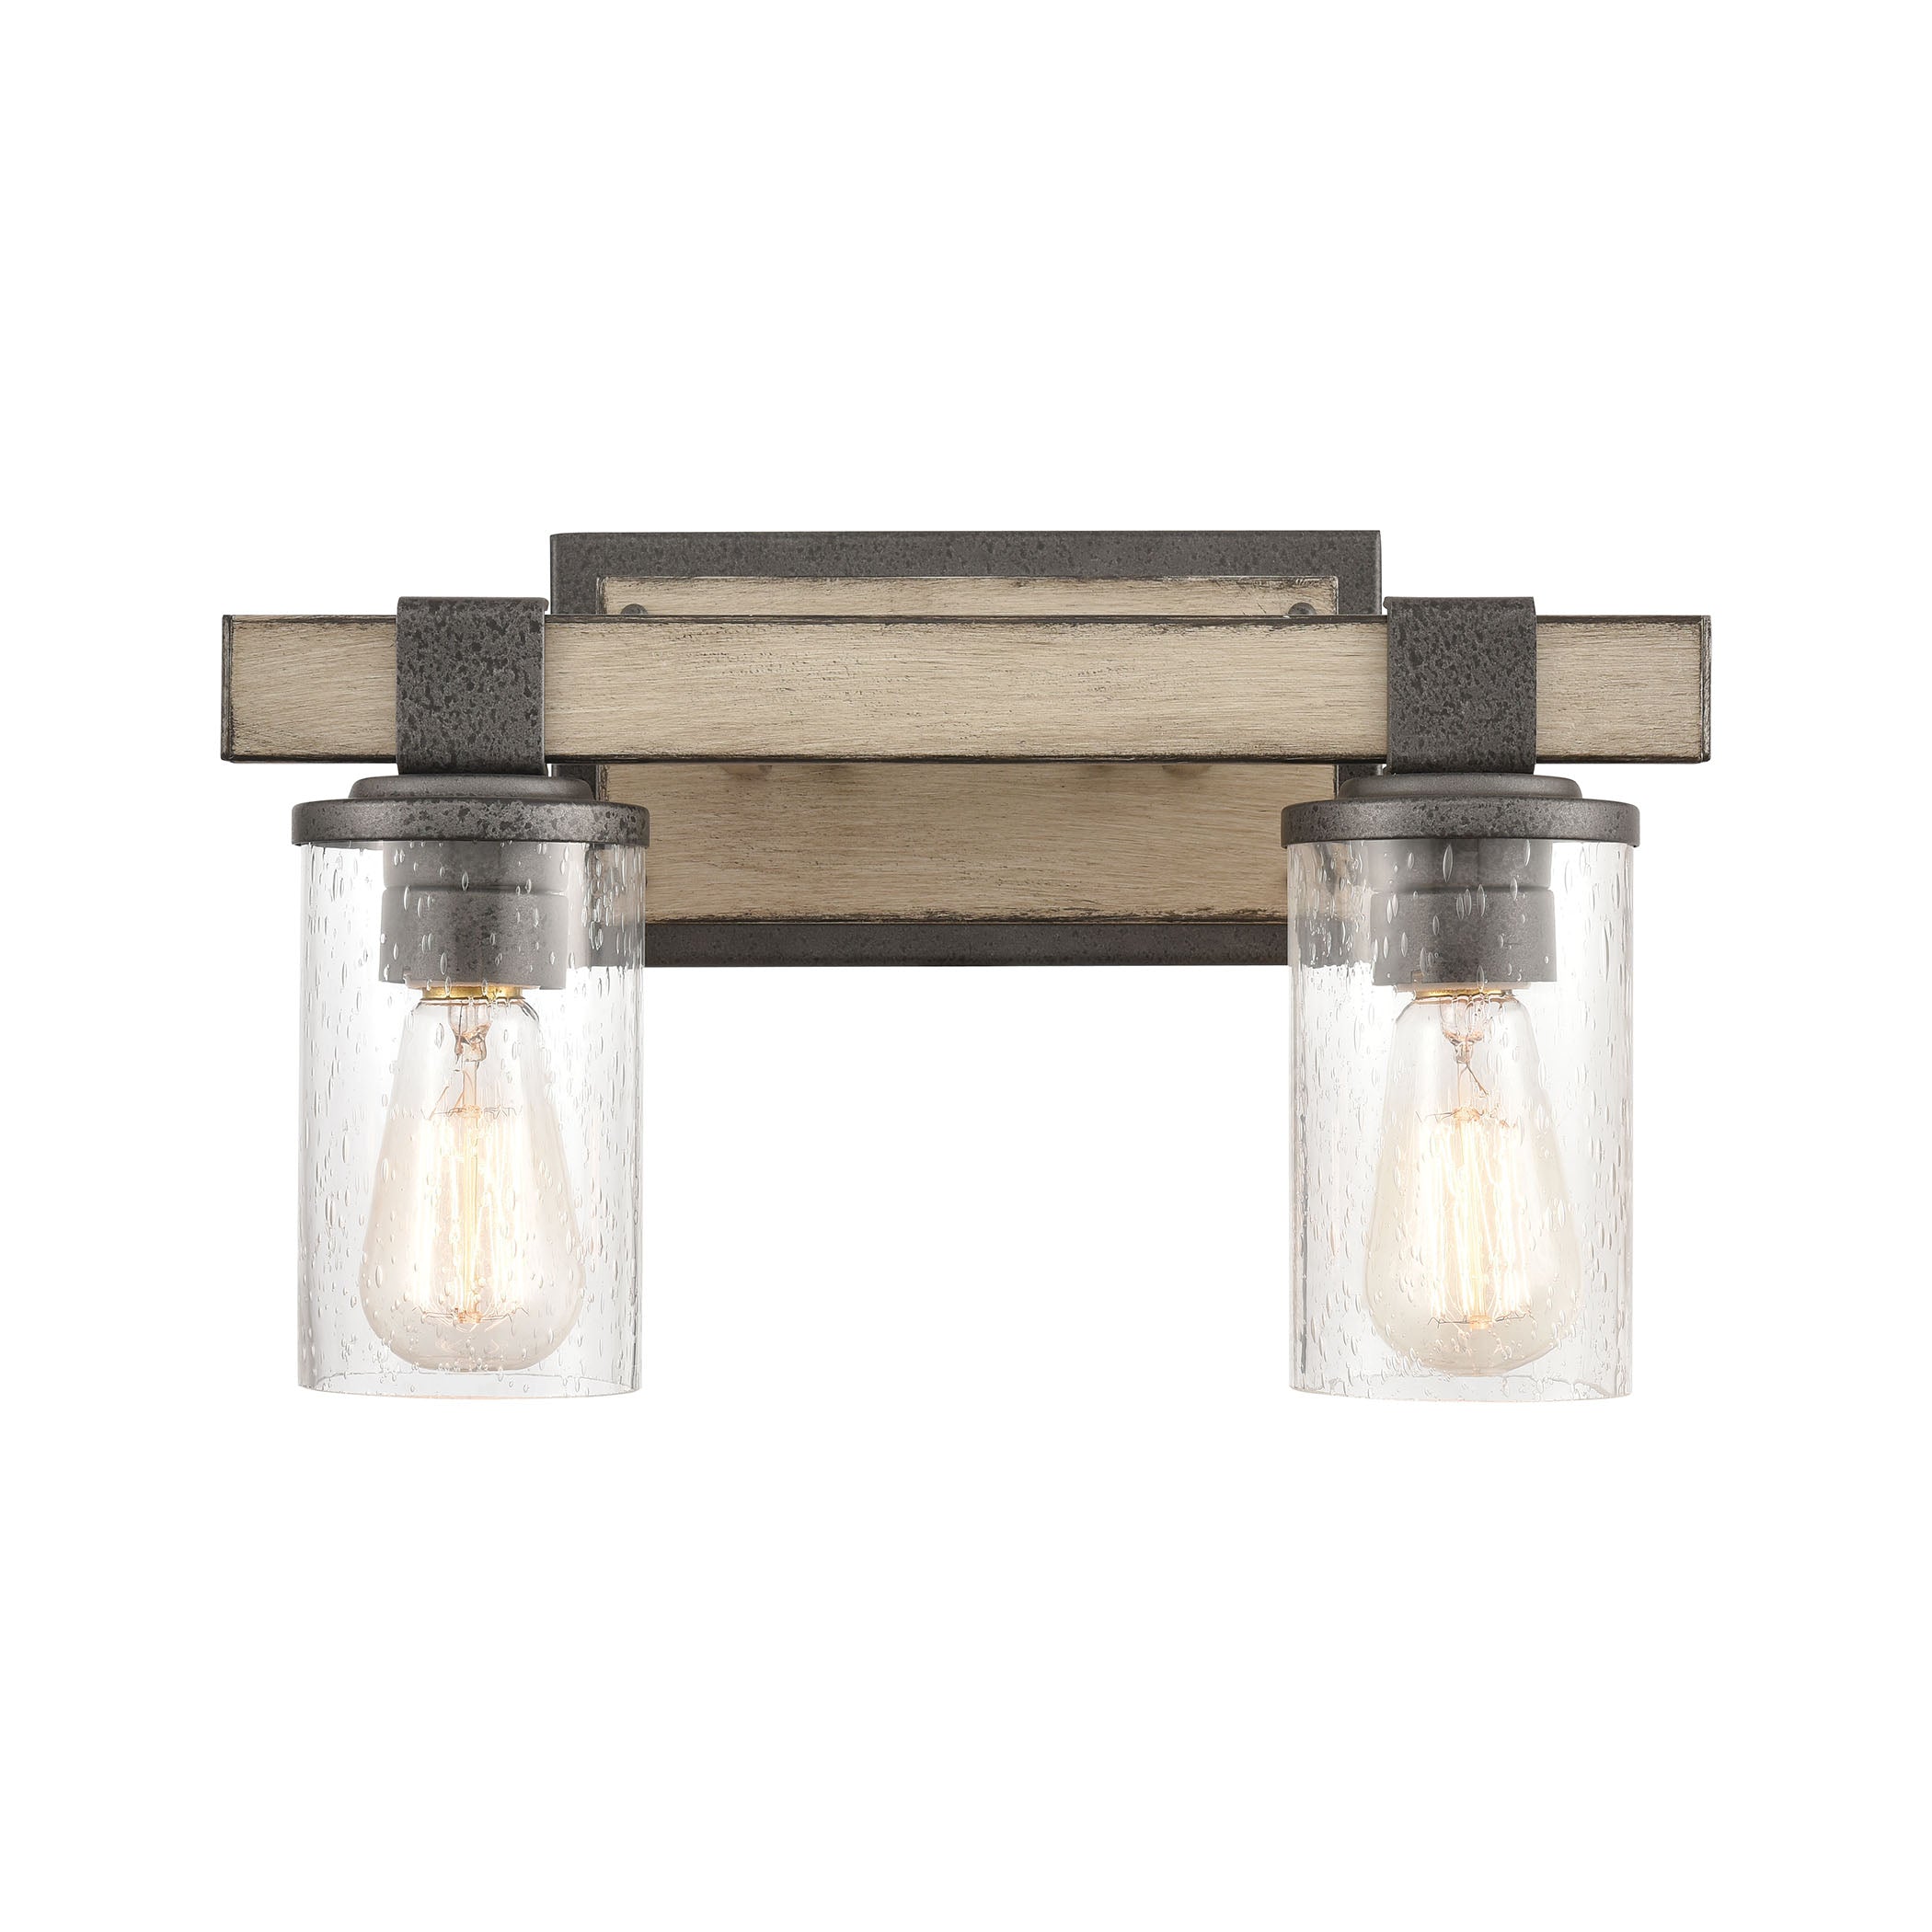 ELK Lighting 89141/2 Crenshaw 2-Light Vanity Light in Anvil Iron and Distressed Antique Graywood with Seedy Glass